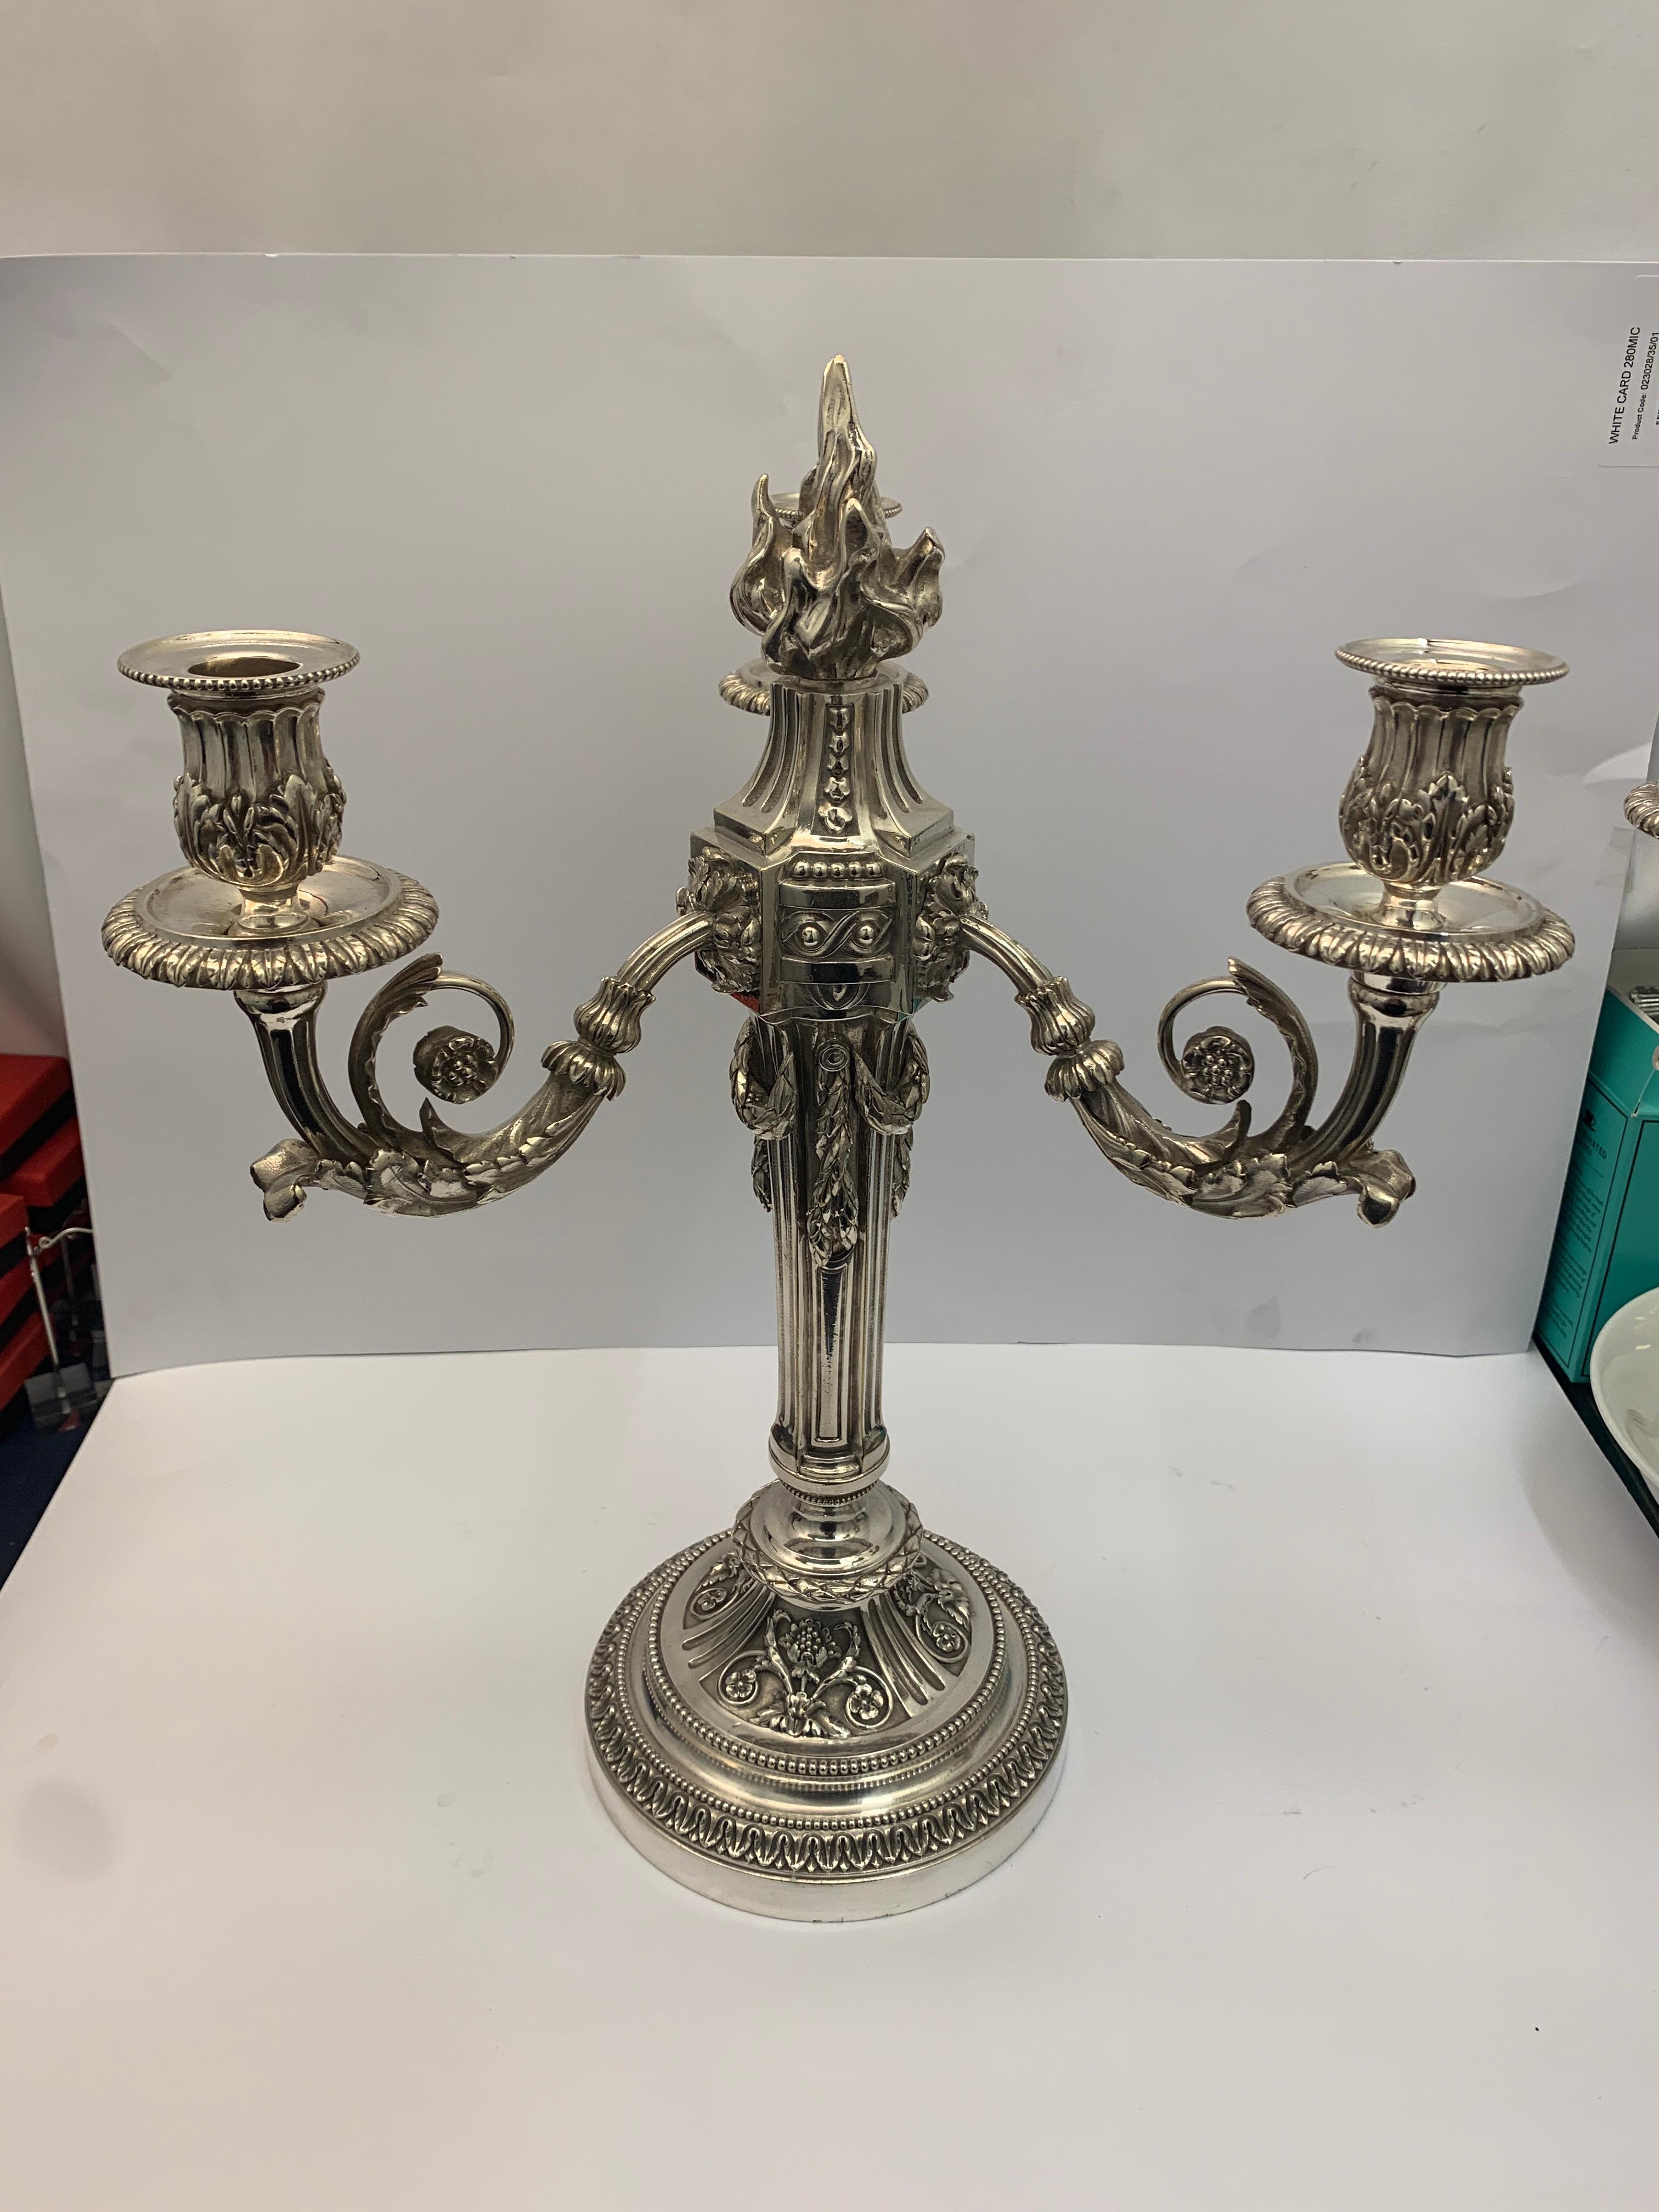 A pair of very heavy silver plated bronze candelabra, decorated with flowers, leaves and vines.